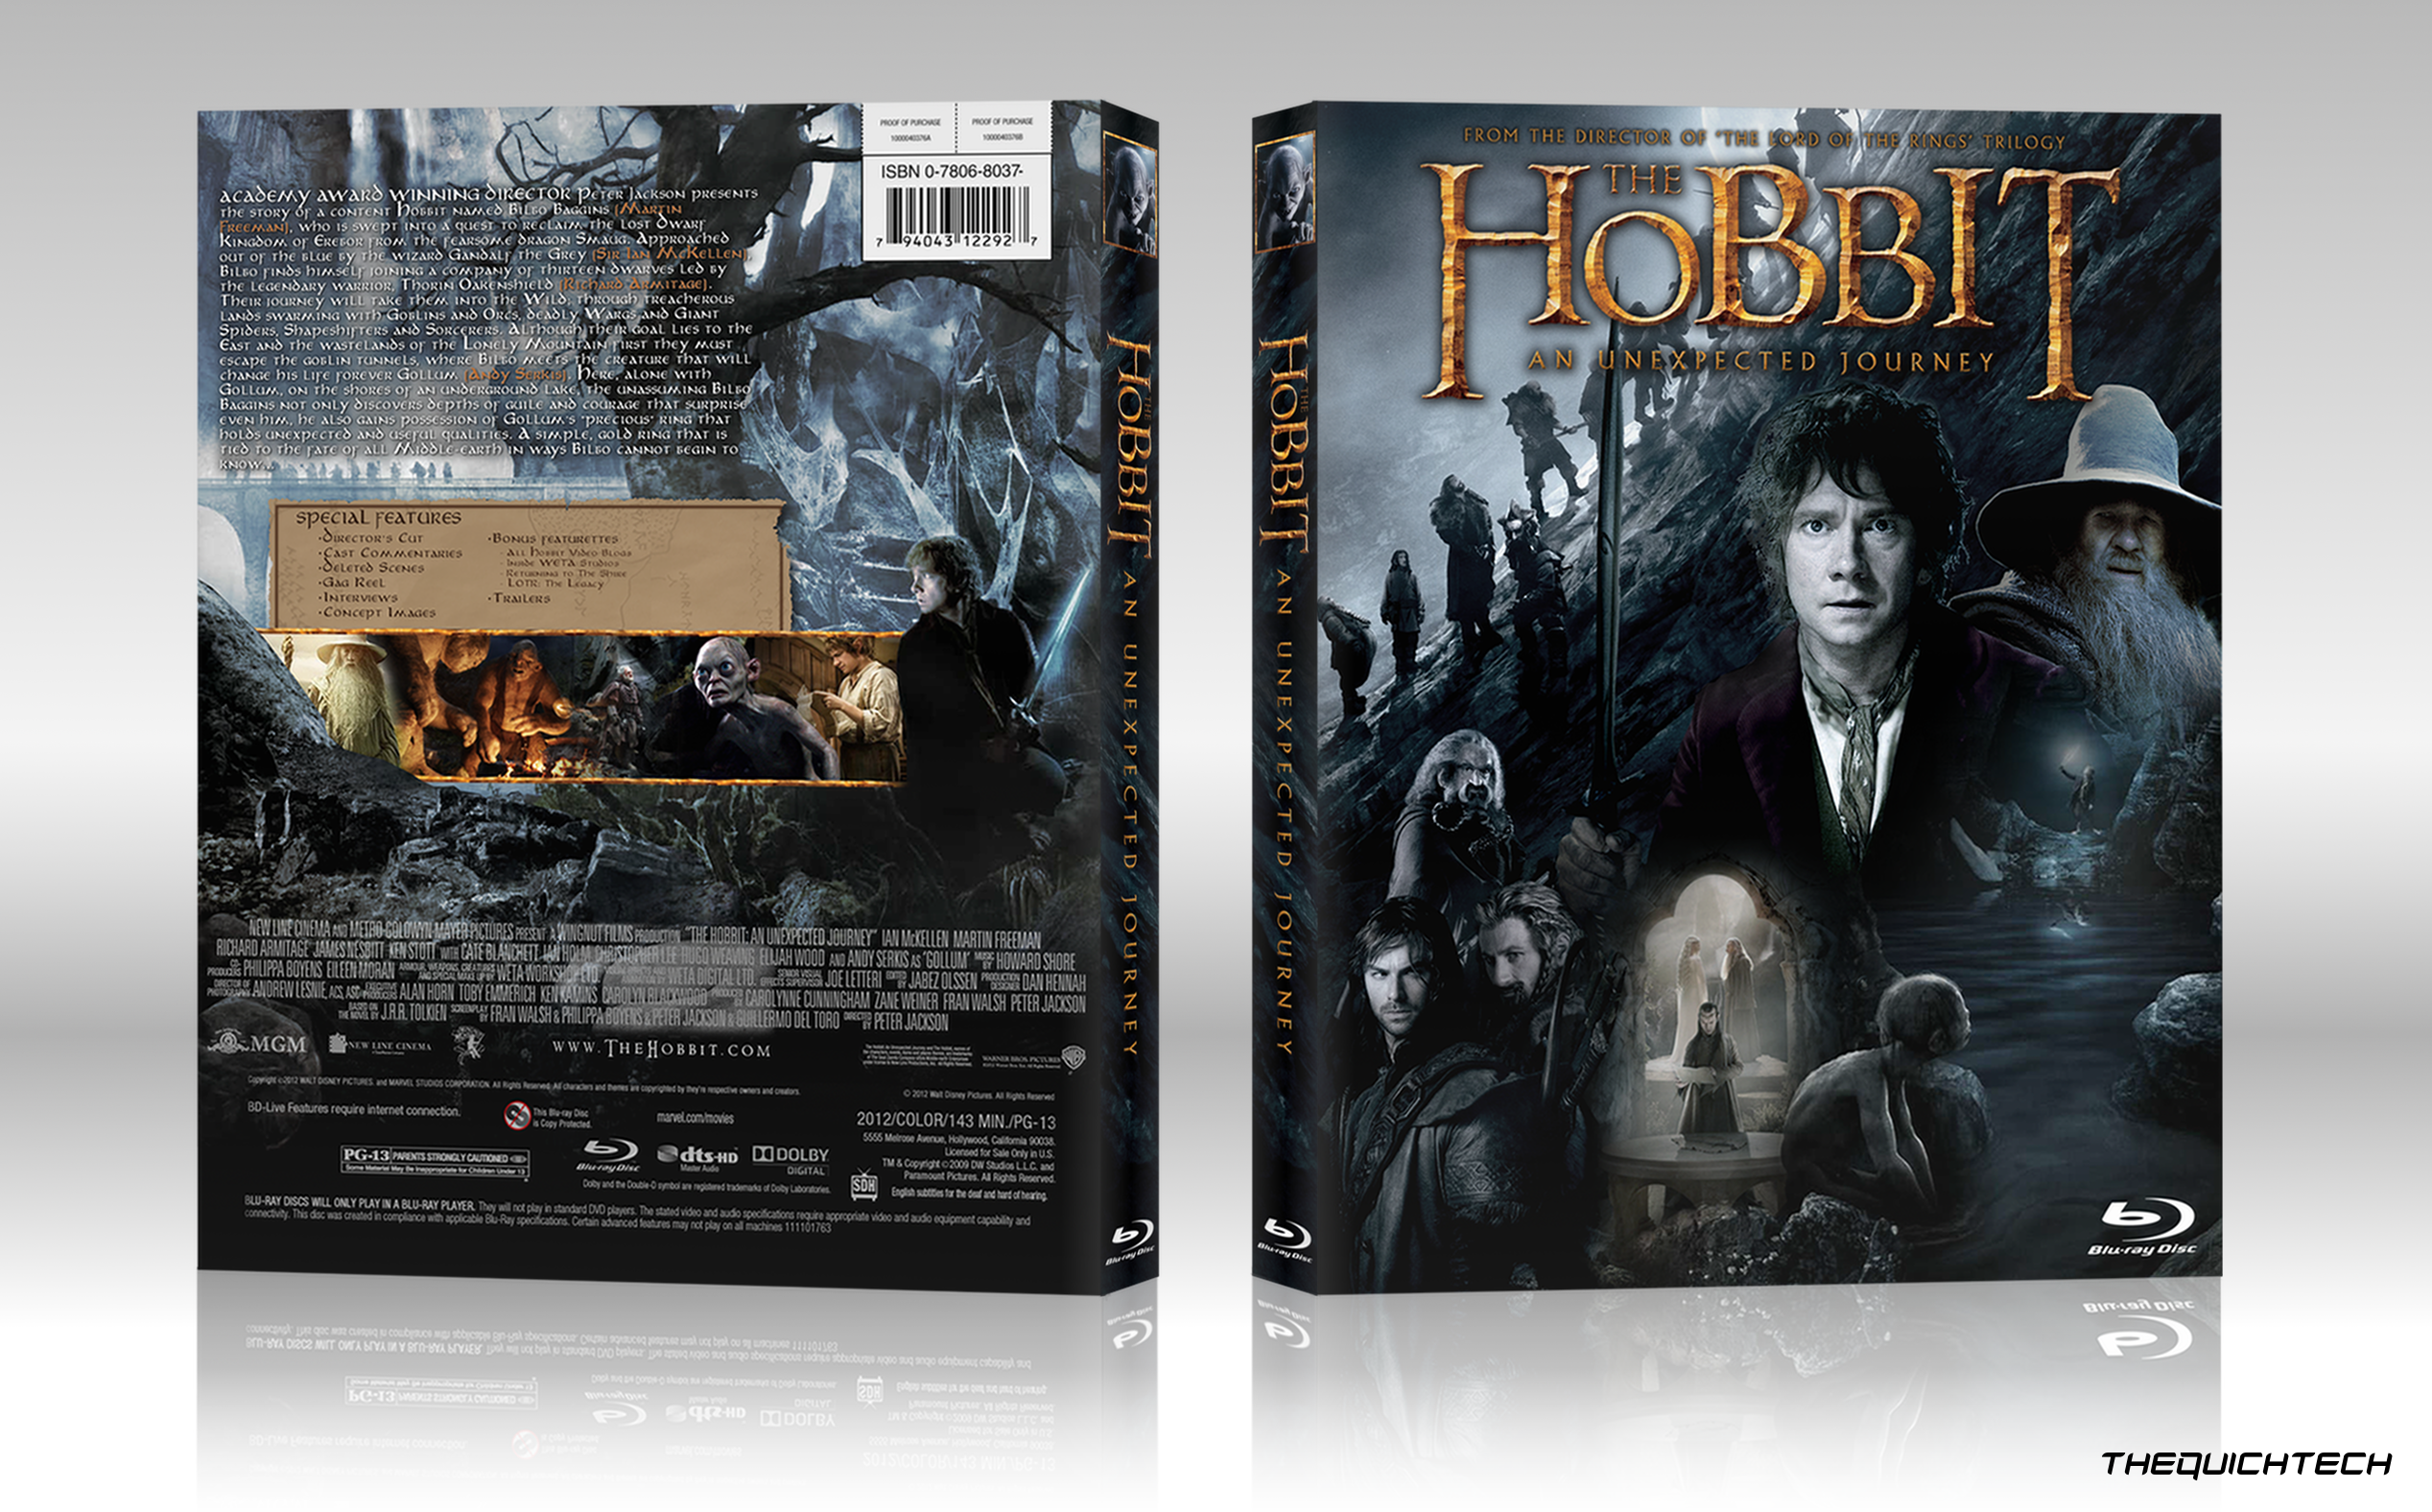 The Hobbit: An Unexpected Journey box cover